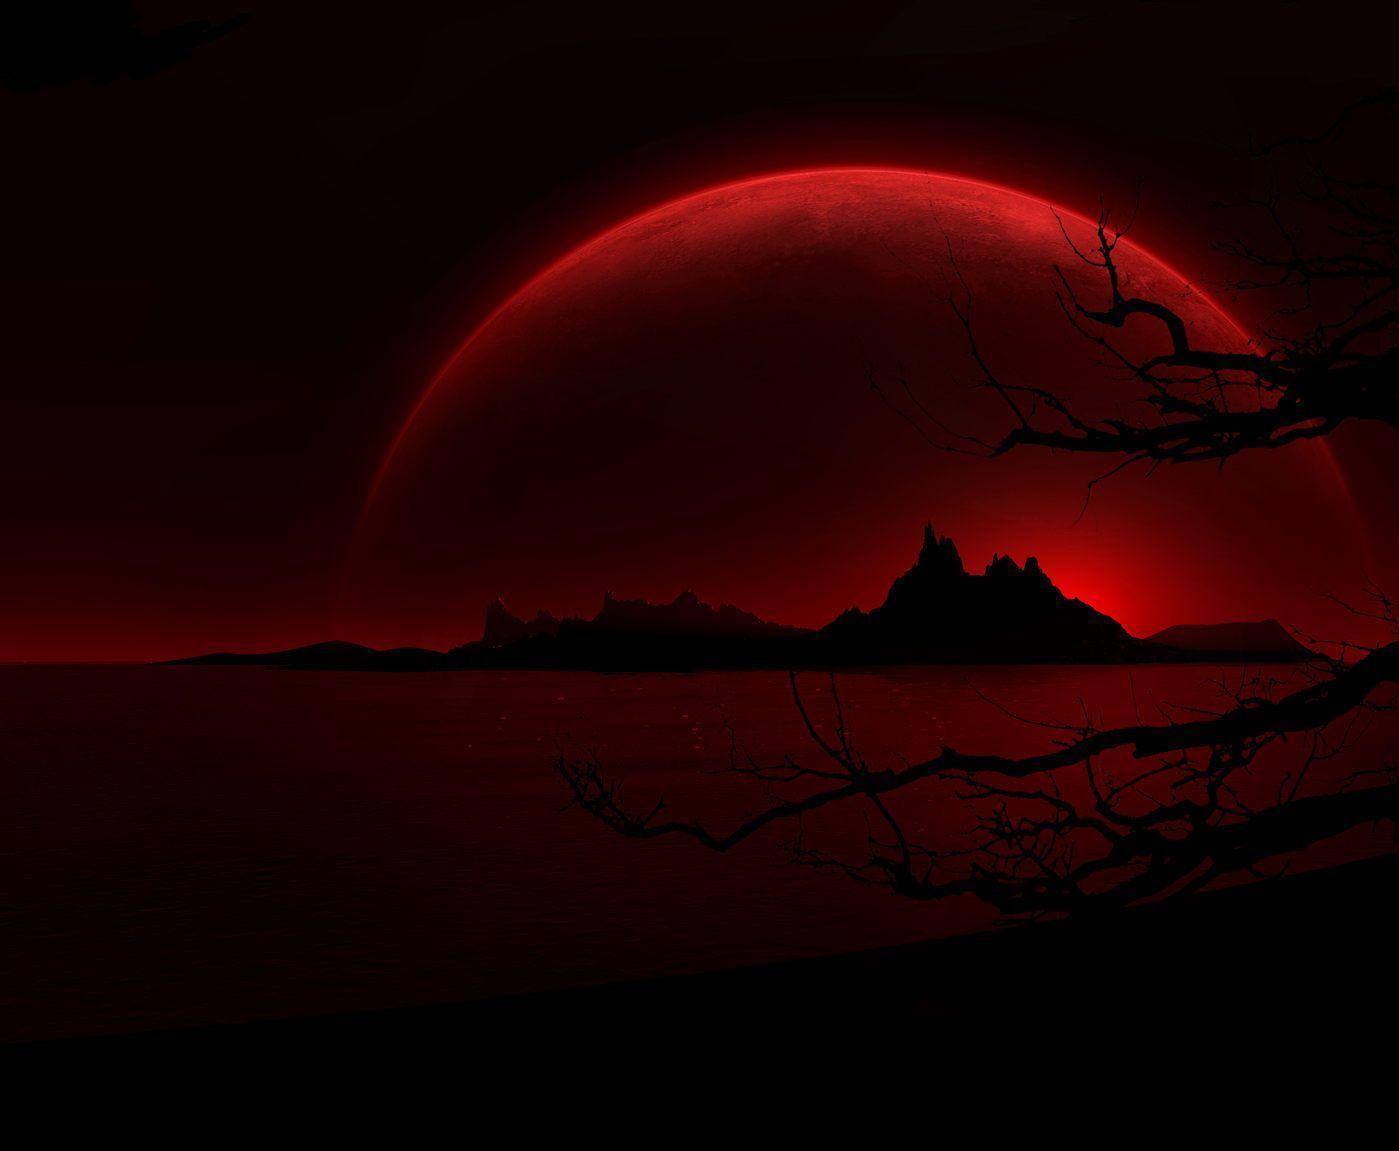 HD wallpaper red moon black blood moon nature astrophotography  outdoors  Wallpaper Flare